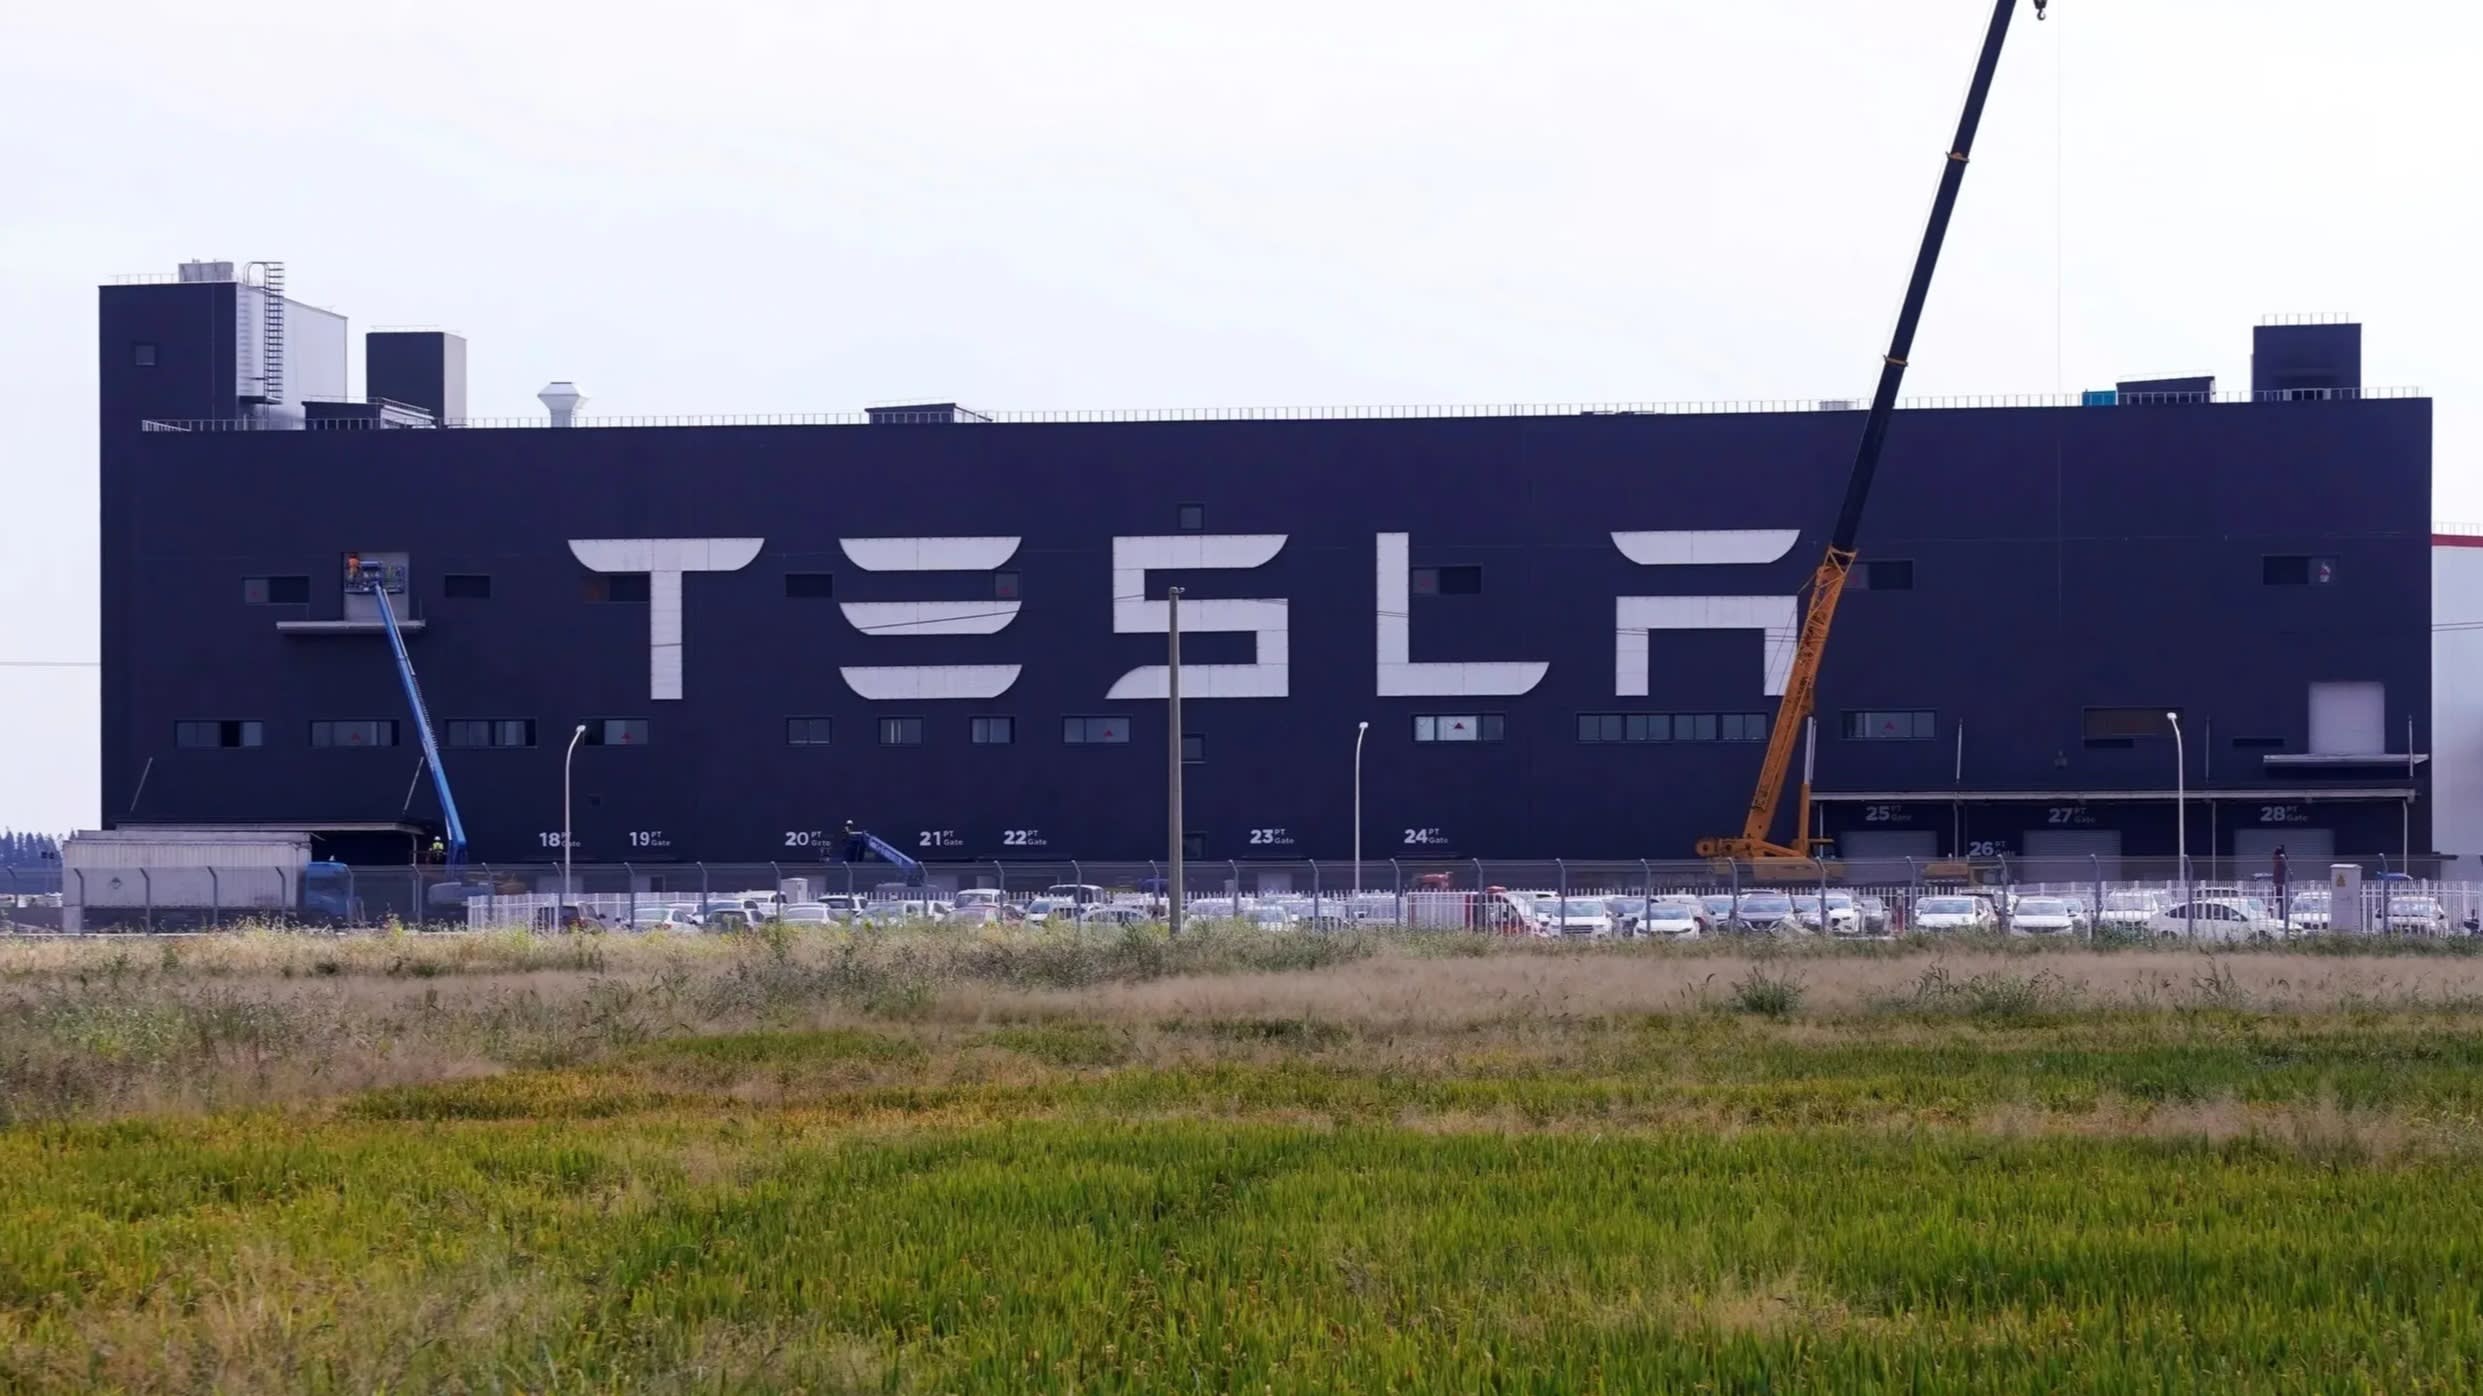 Tesla Giga Shanghai Strong Q4 Sales Could Be Tipping Point for 500K 2020 Deliveries